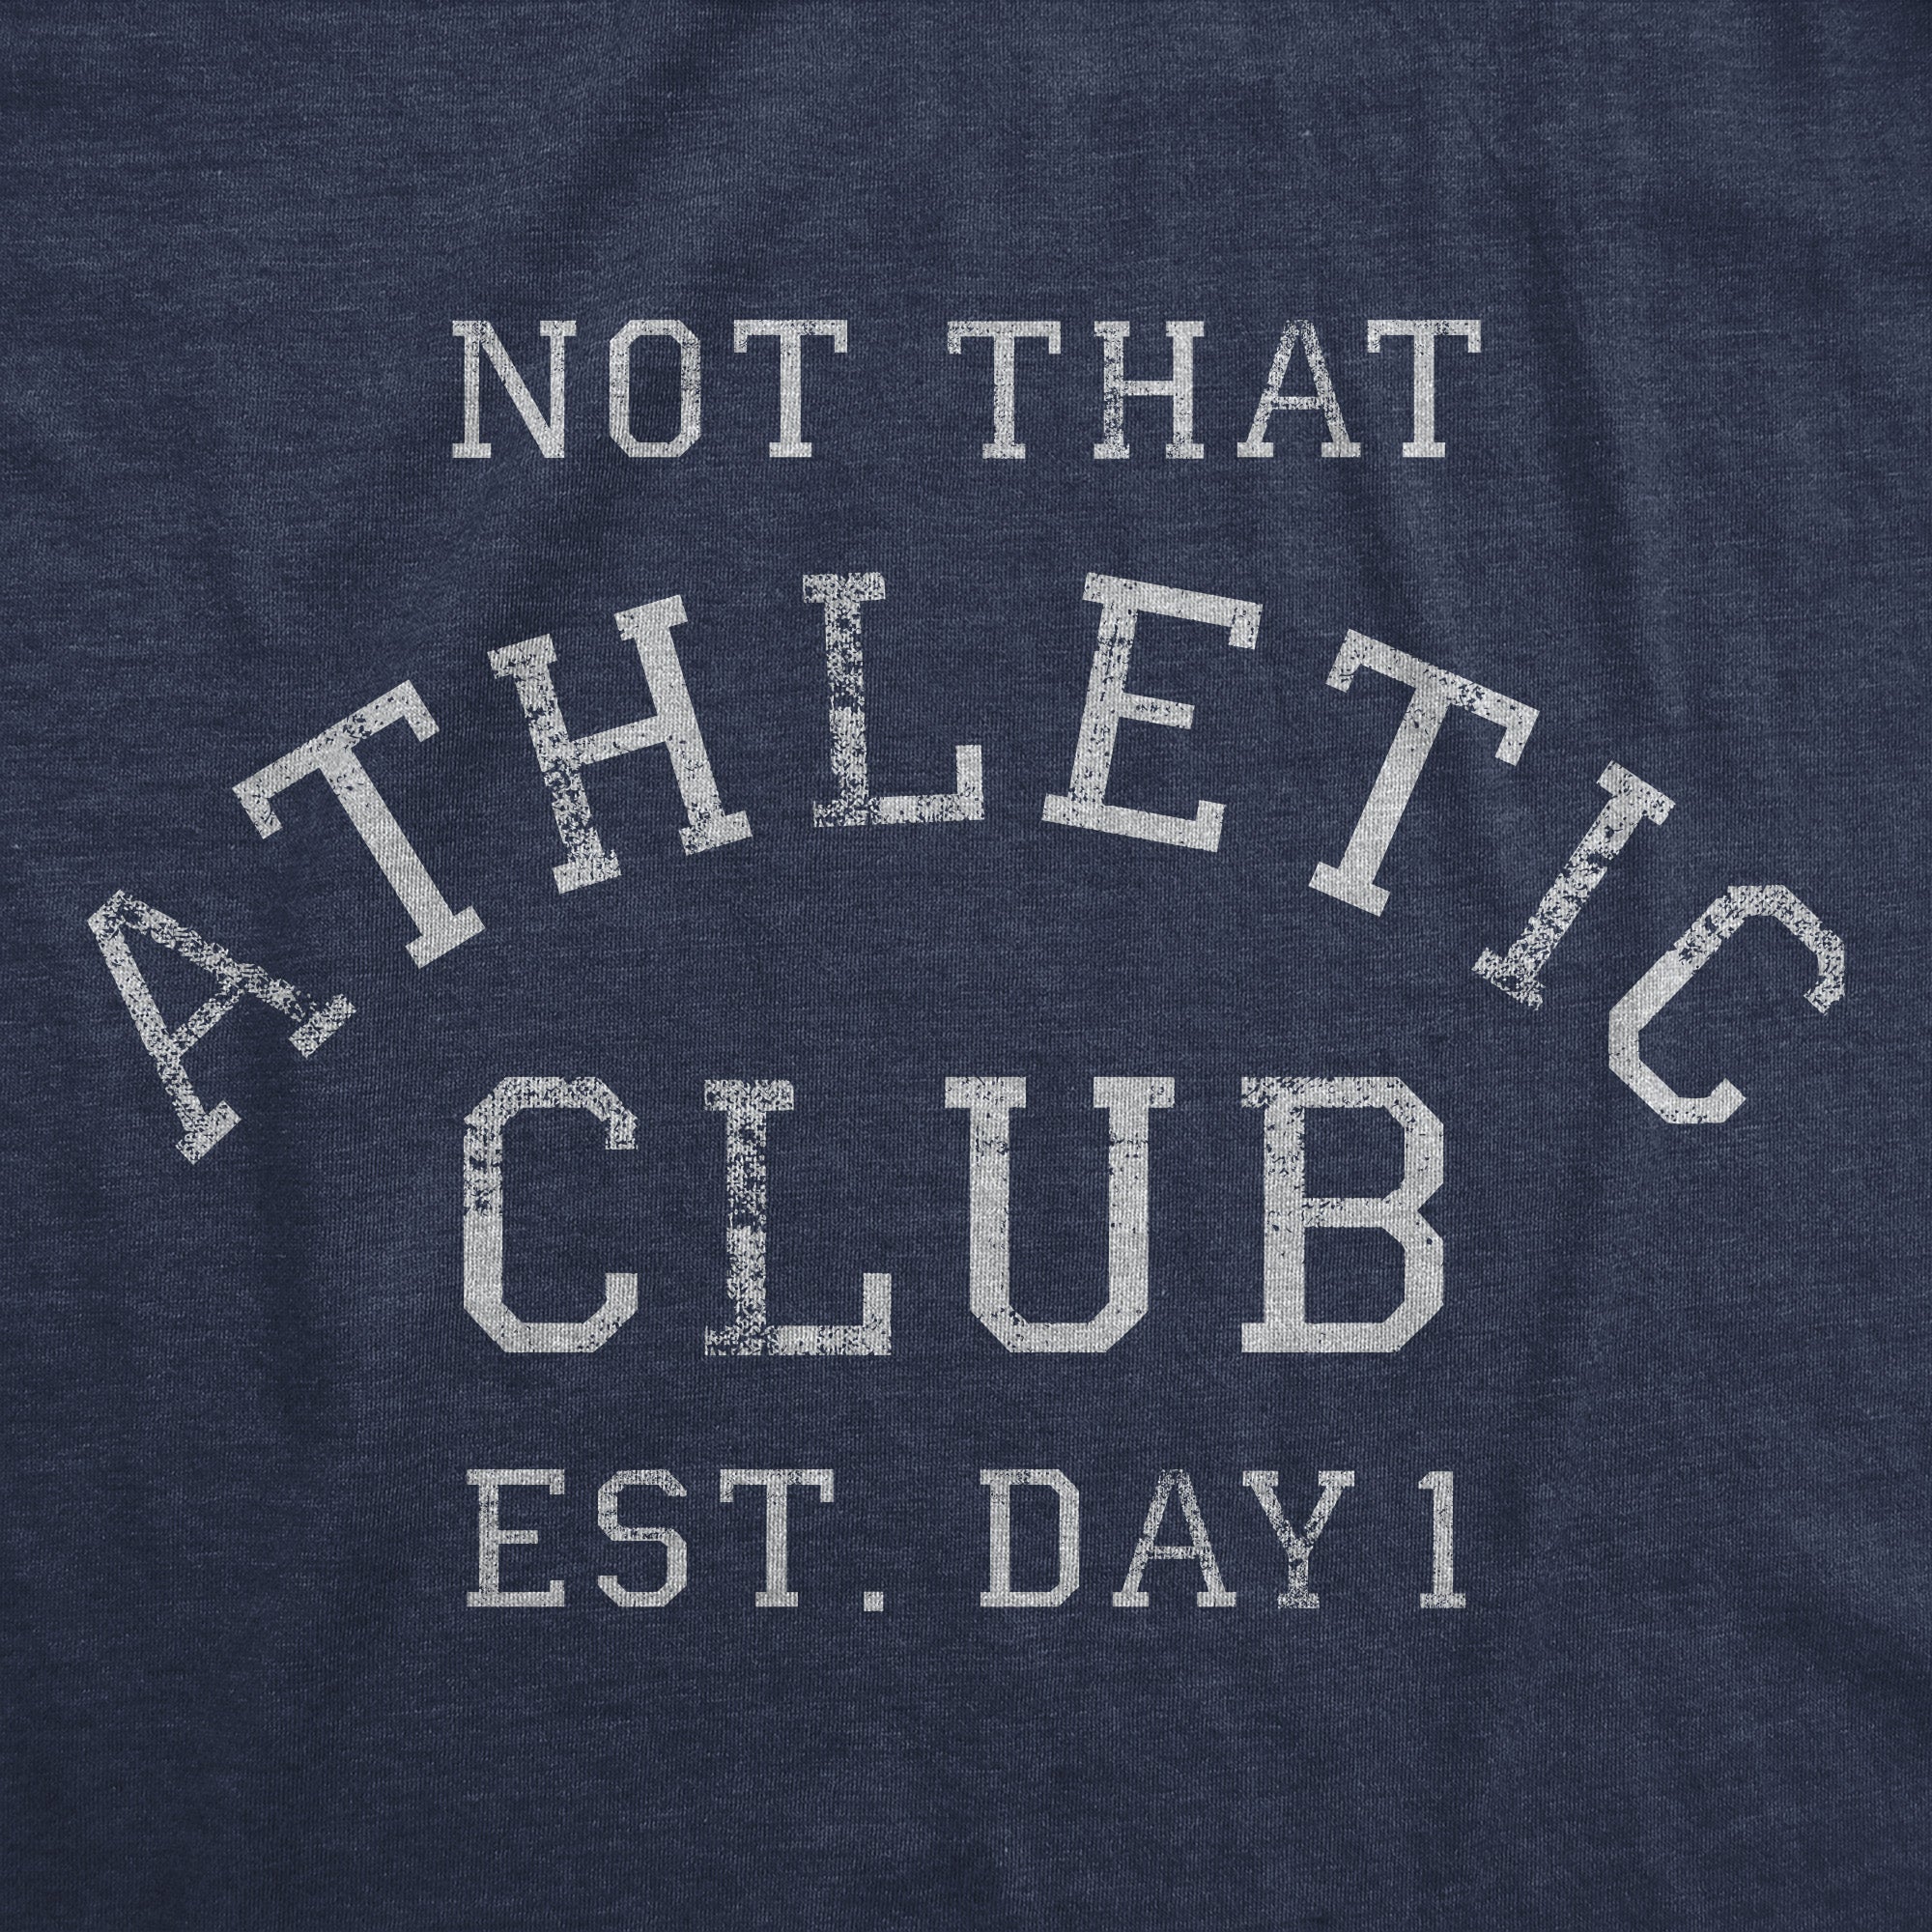 Funny Heather Navy - ATHLETIC Not That Athletic Club Mens T Shirt Nerdy Sarcastic fitness Tee